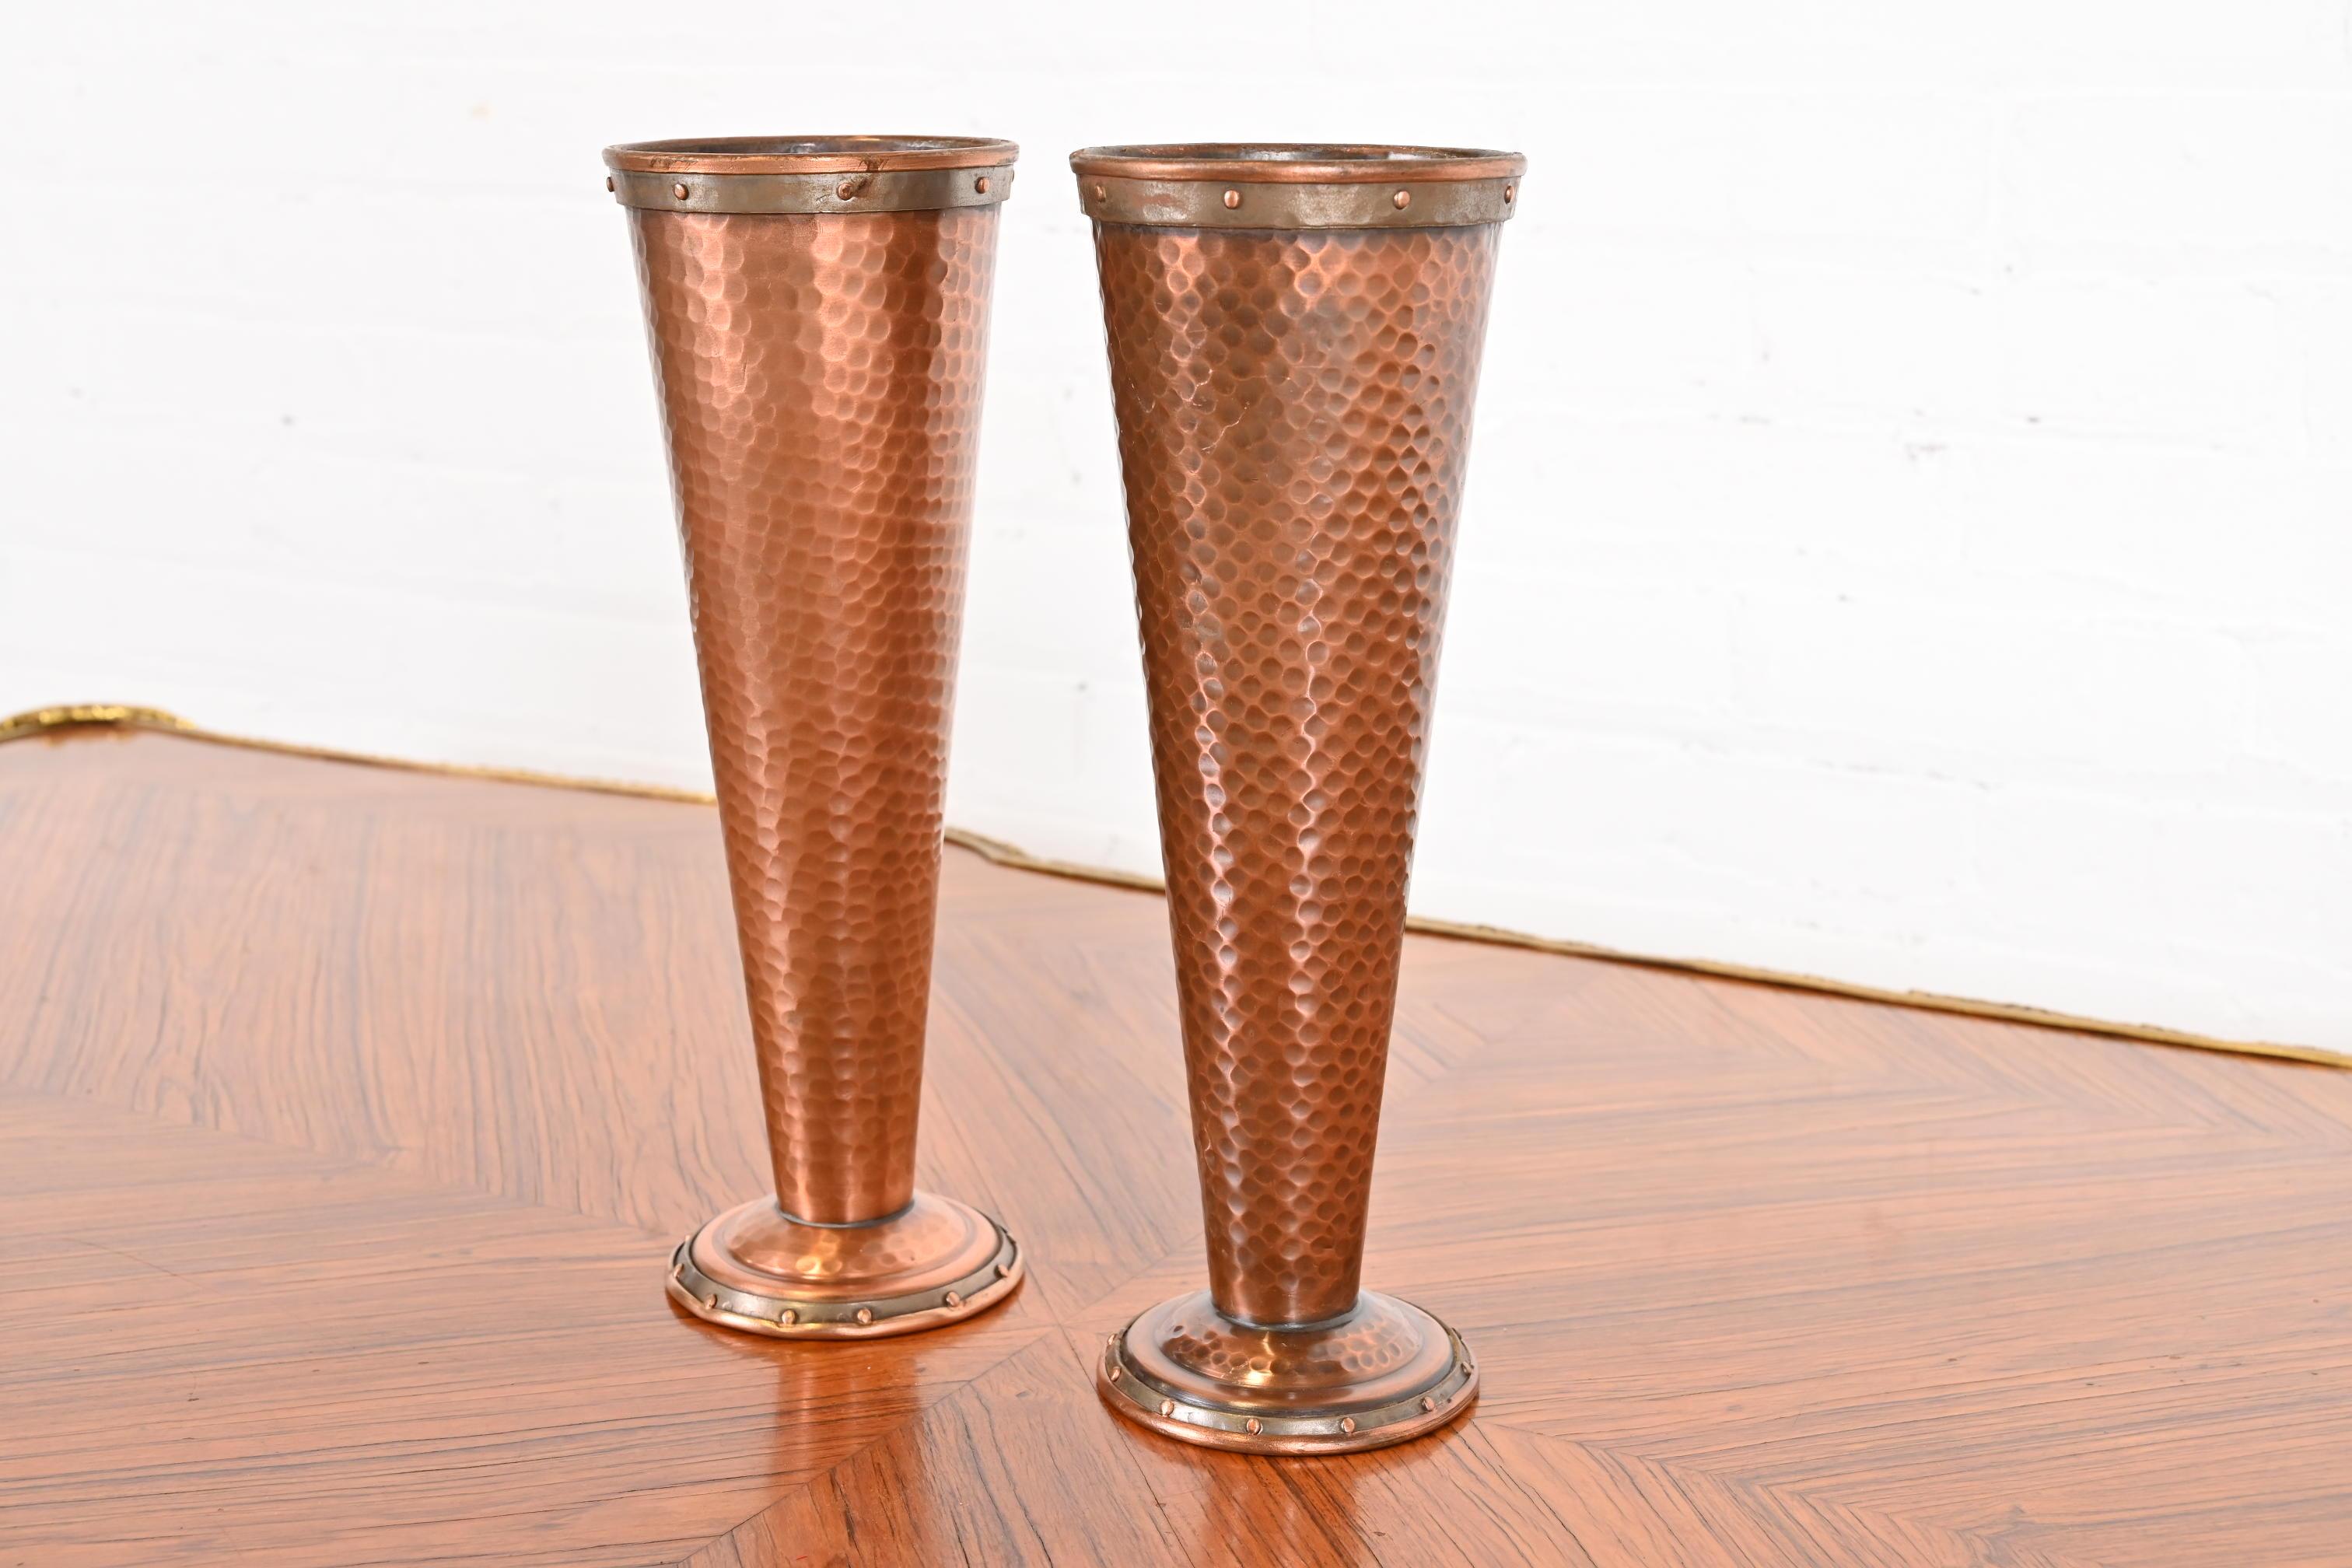 20th Century Joseph Heinrichs Style Arts and Crafts Hand-Hammered Copper Vases, Pair For Sale